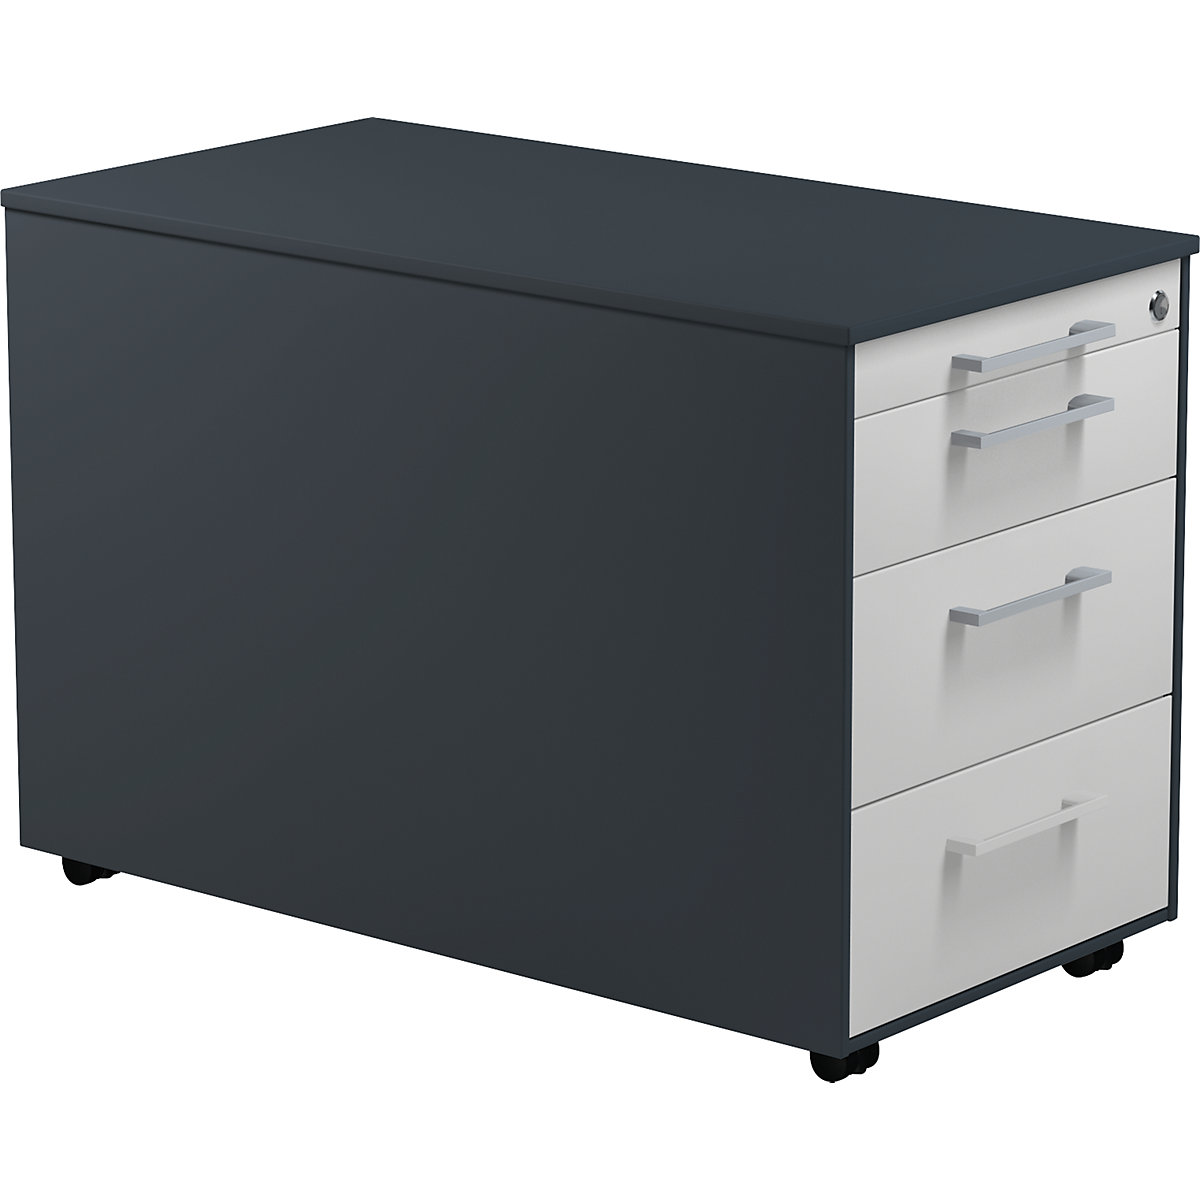 Mobile pedestal on castors – mauser, HxD 520 x 800 mm, 3 drawers, charcoal / light grey / charcoal-5